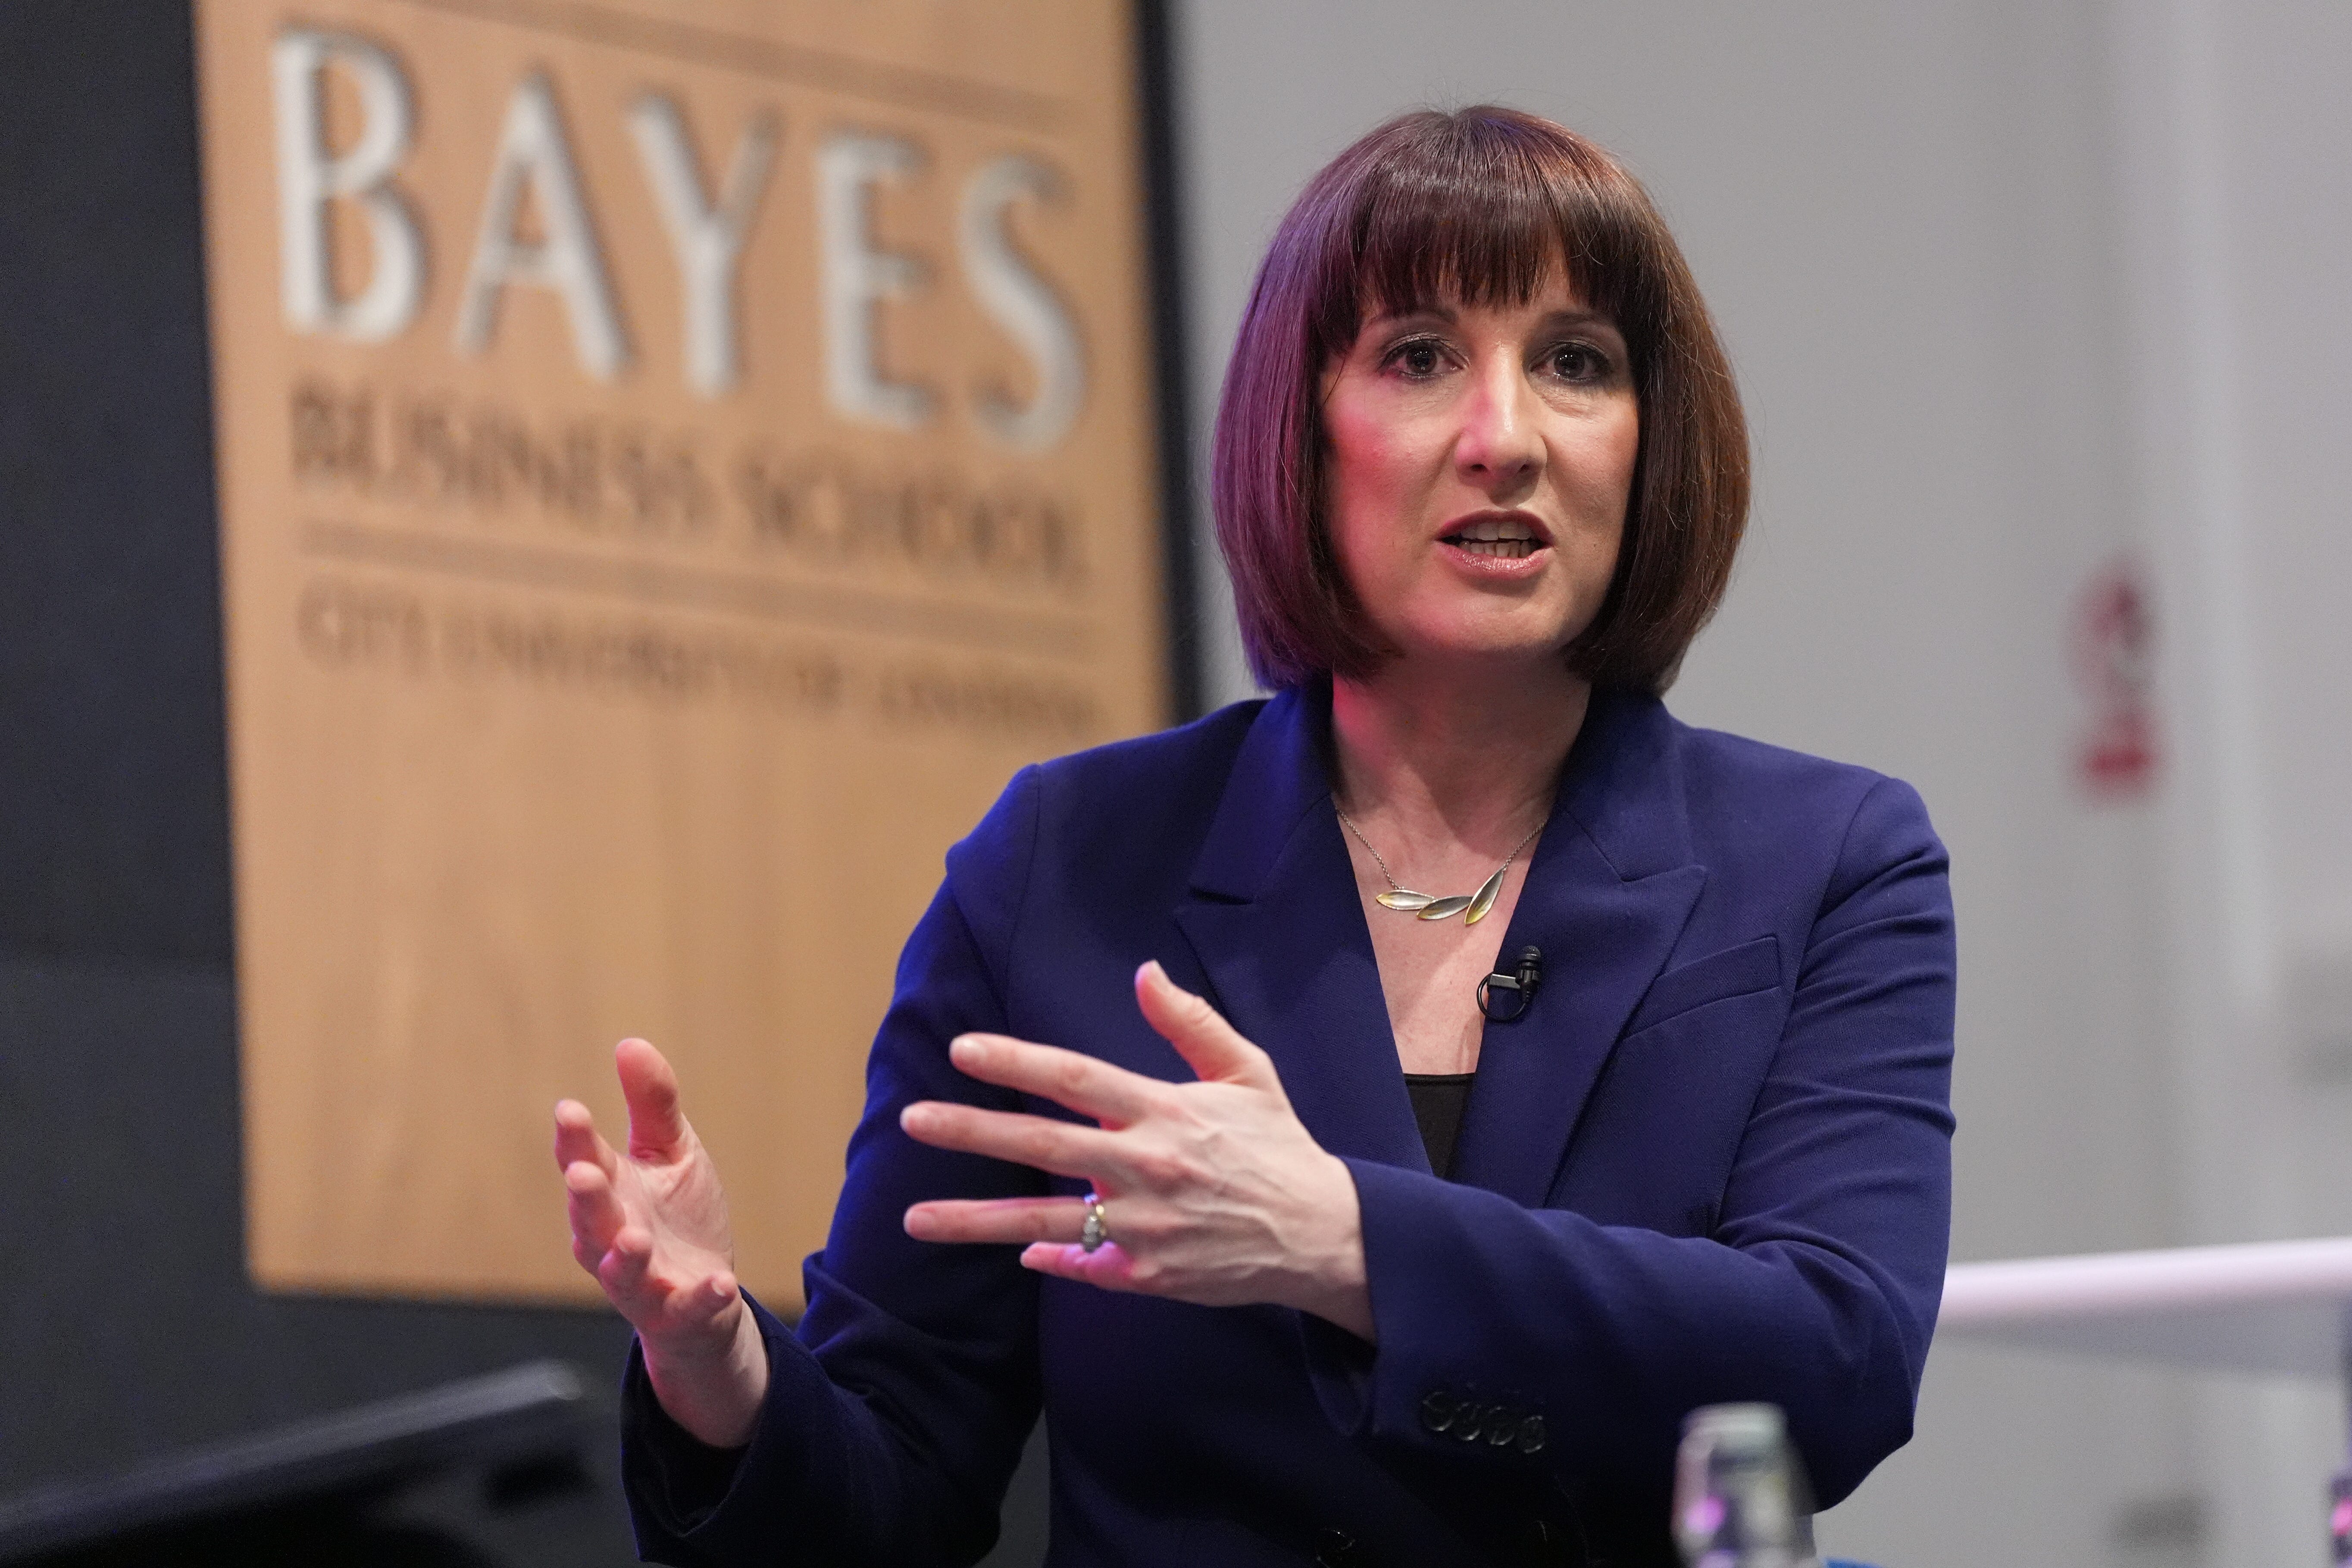 Hunt challenged shadow chancellor Rachel Reeves on the contents of her Mais lecture